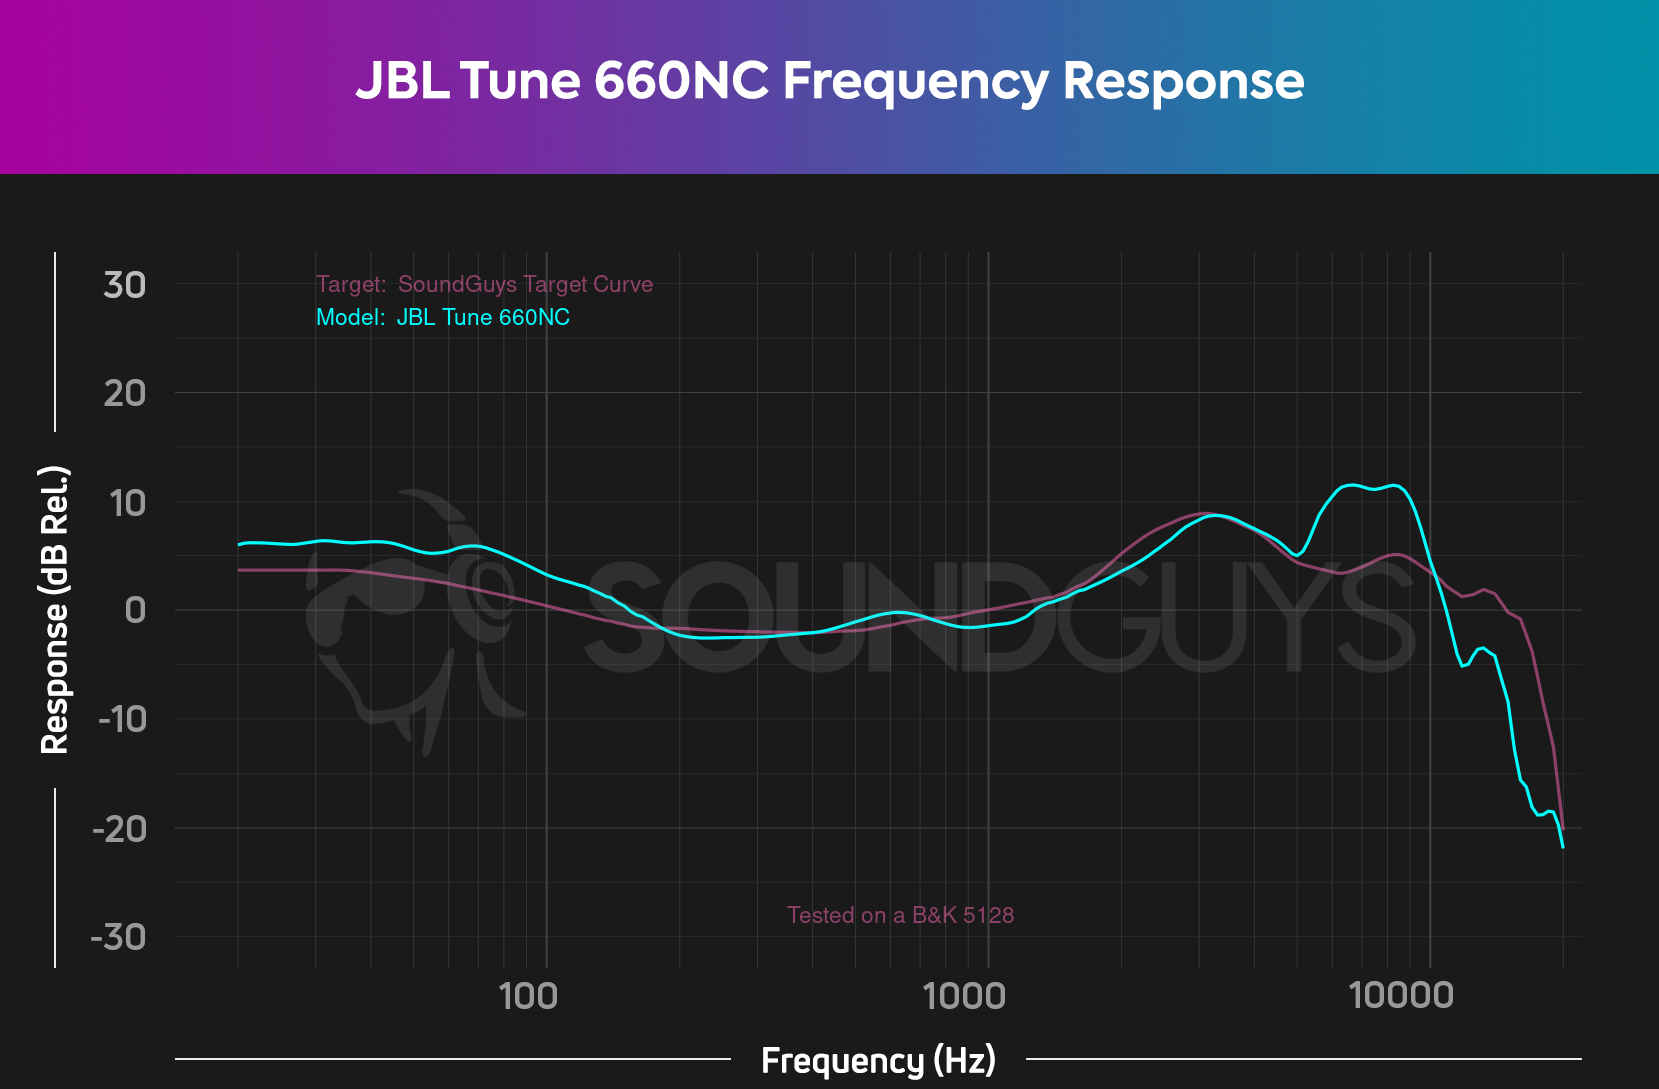 JBL Tune 660NC frequency response chart showing a curve that closely follows the SoundGuys house curve.